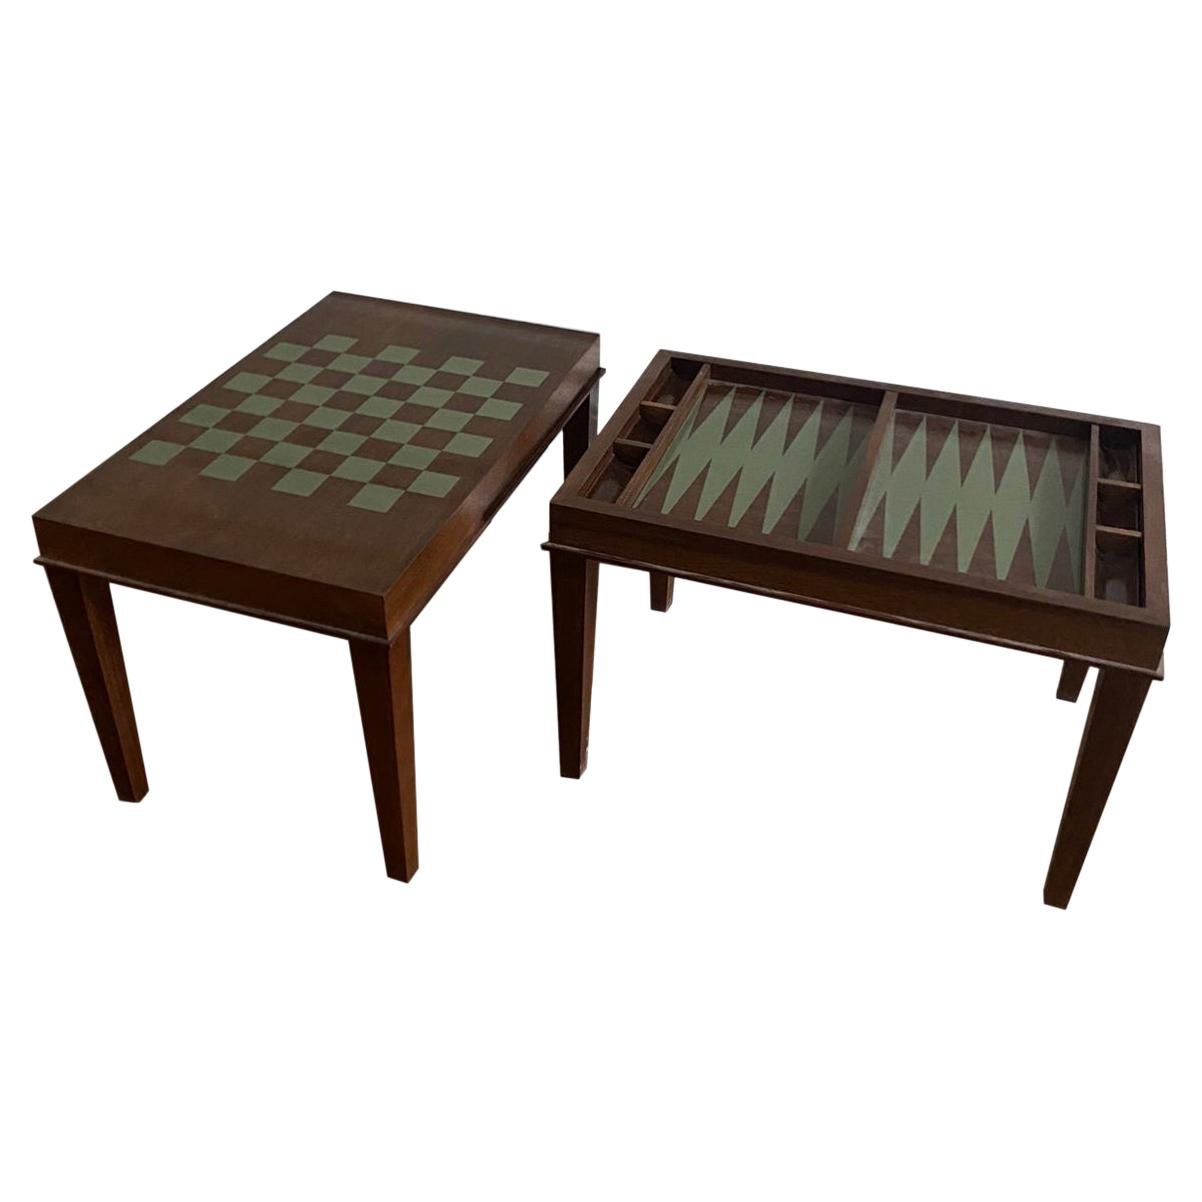 Painted Chess and Backgammon Game Tables